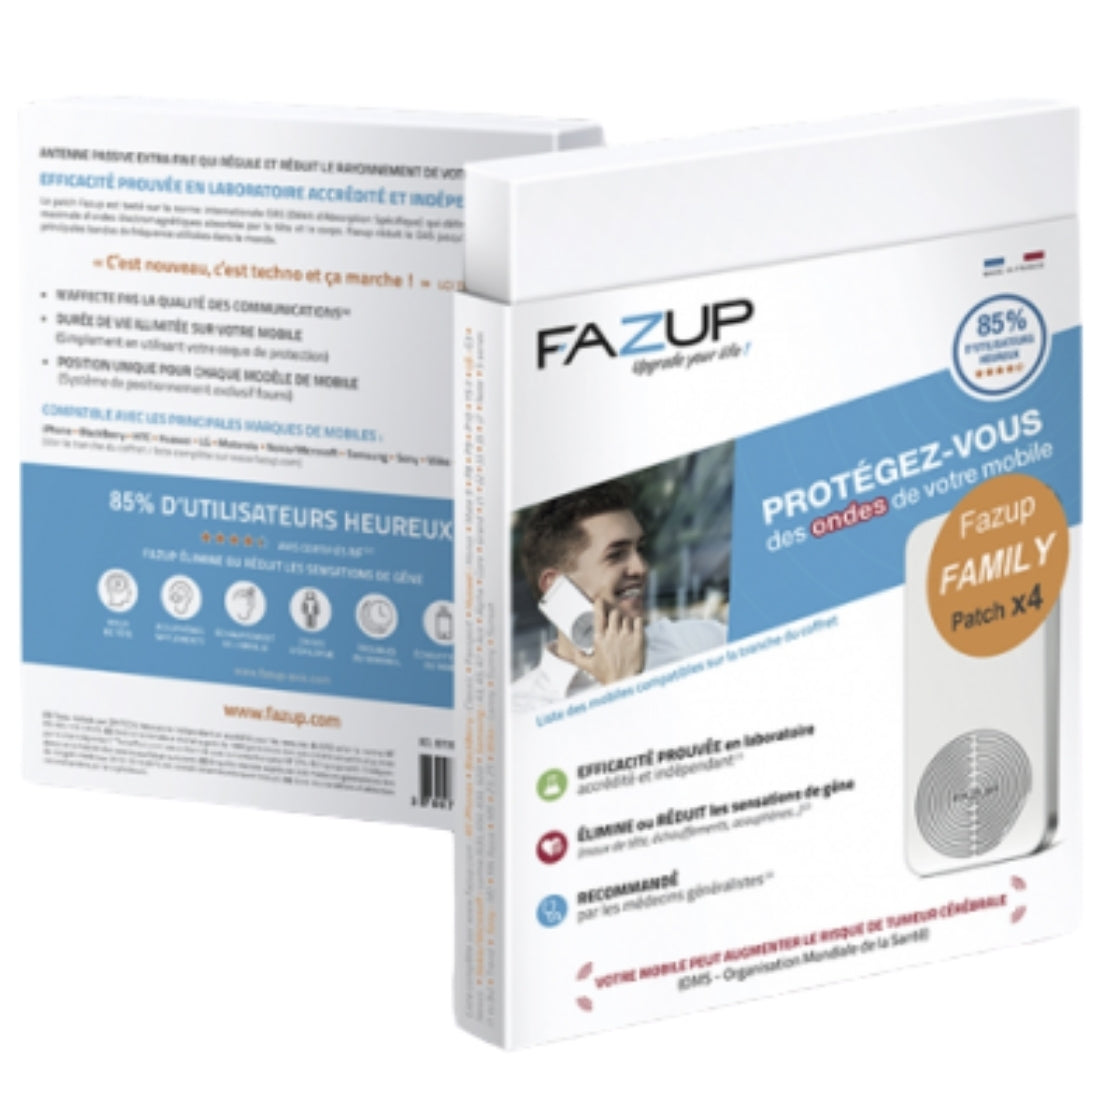 Fazup Patch (Protect Yourself From Cell Phone Radiation)